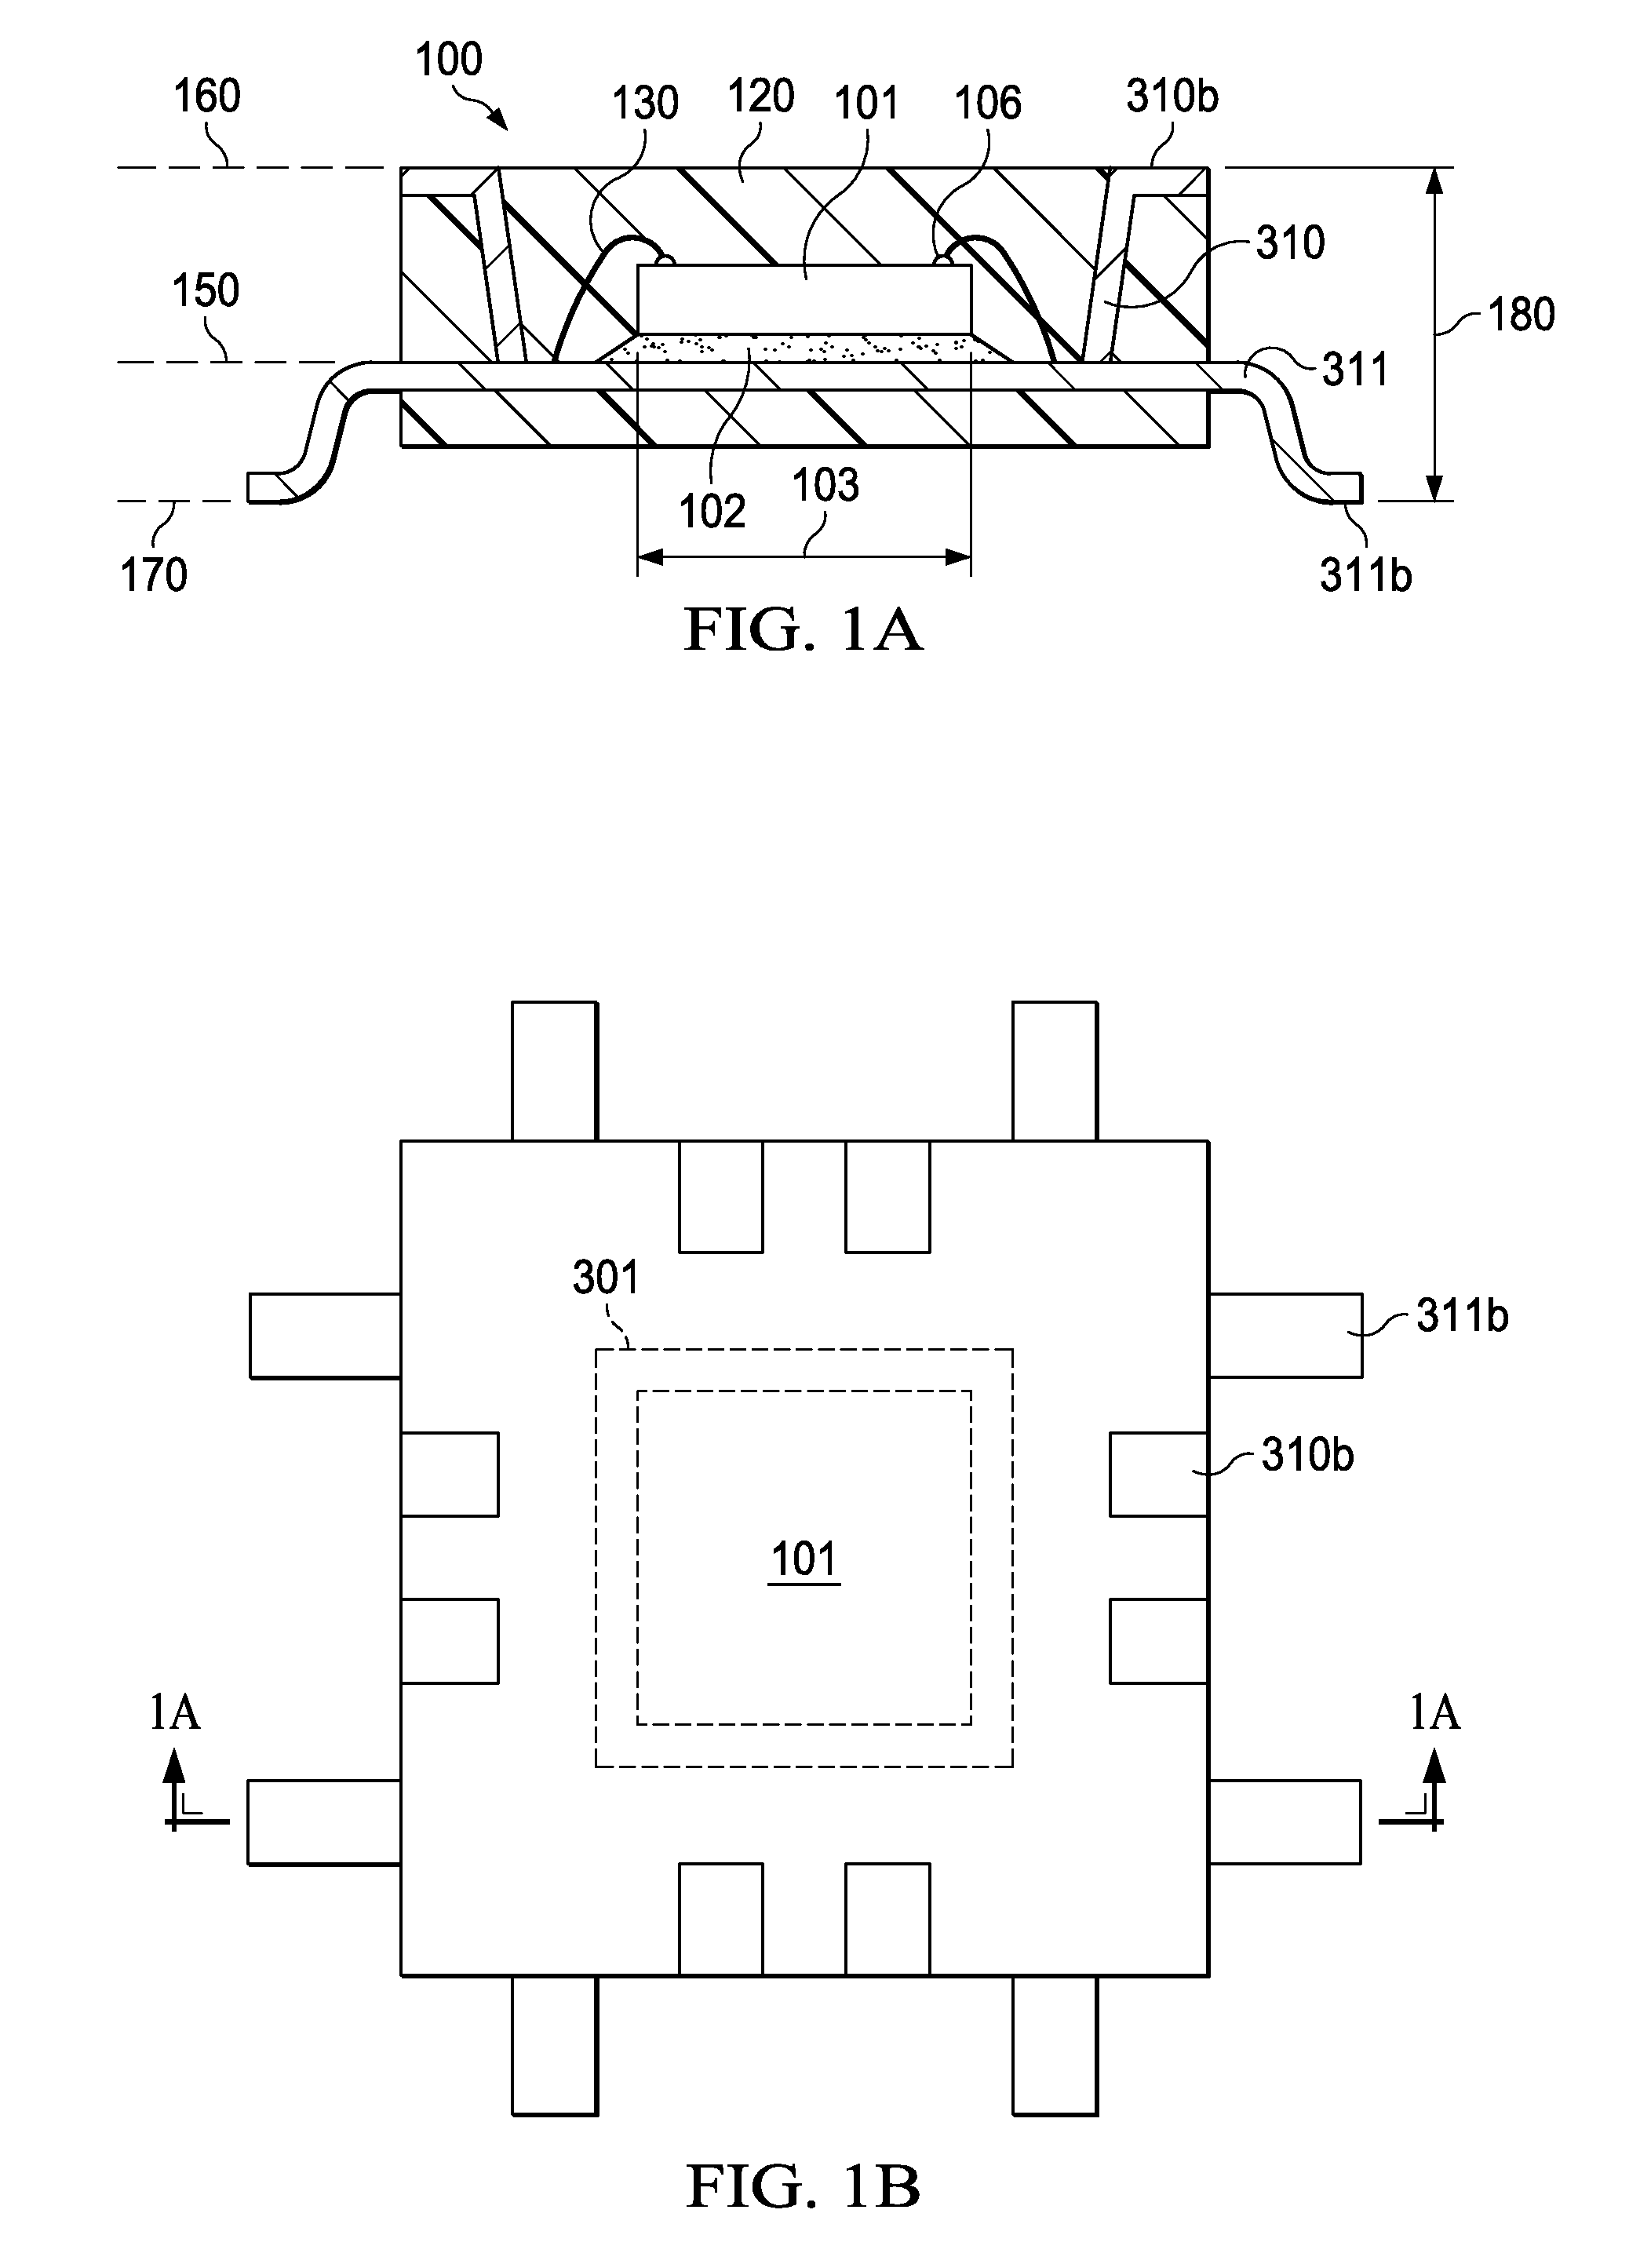 Leadframe-Based Semiconductor Package Having Terminals on Top and Bottom Surfaces